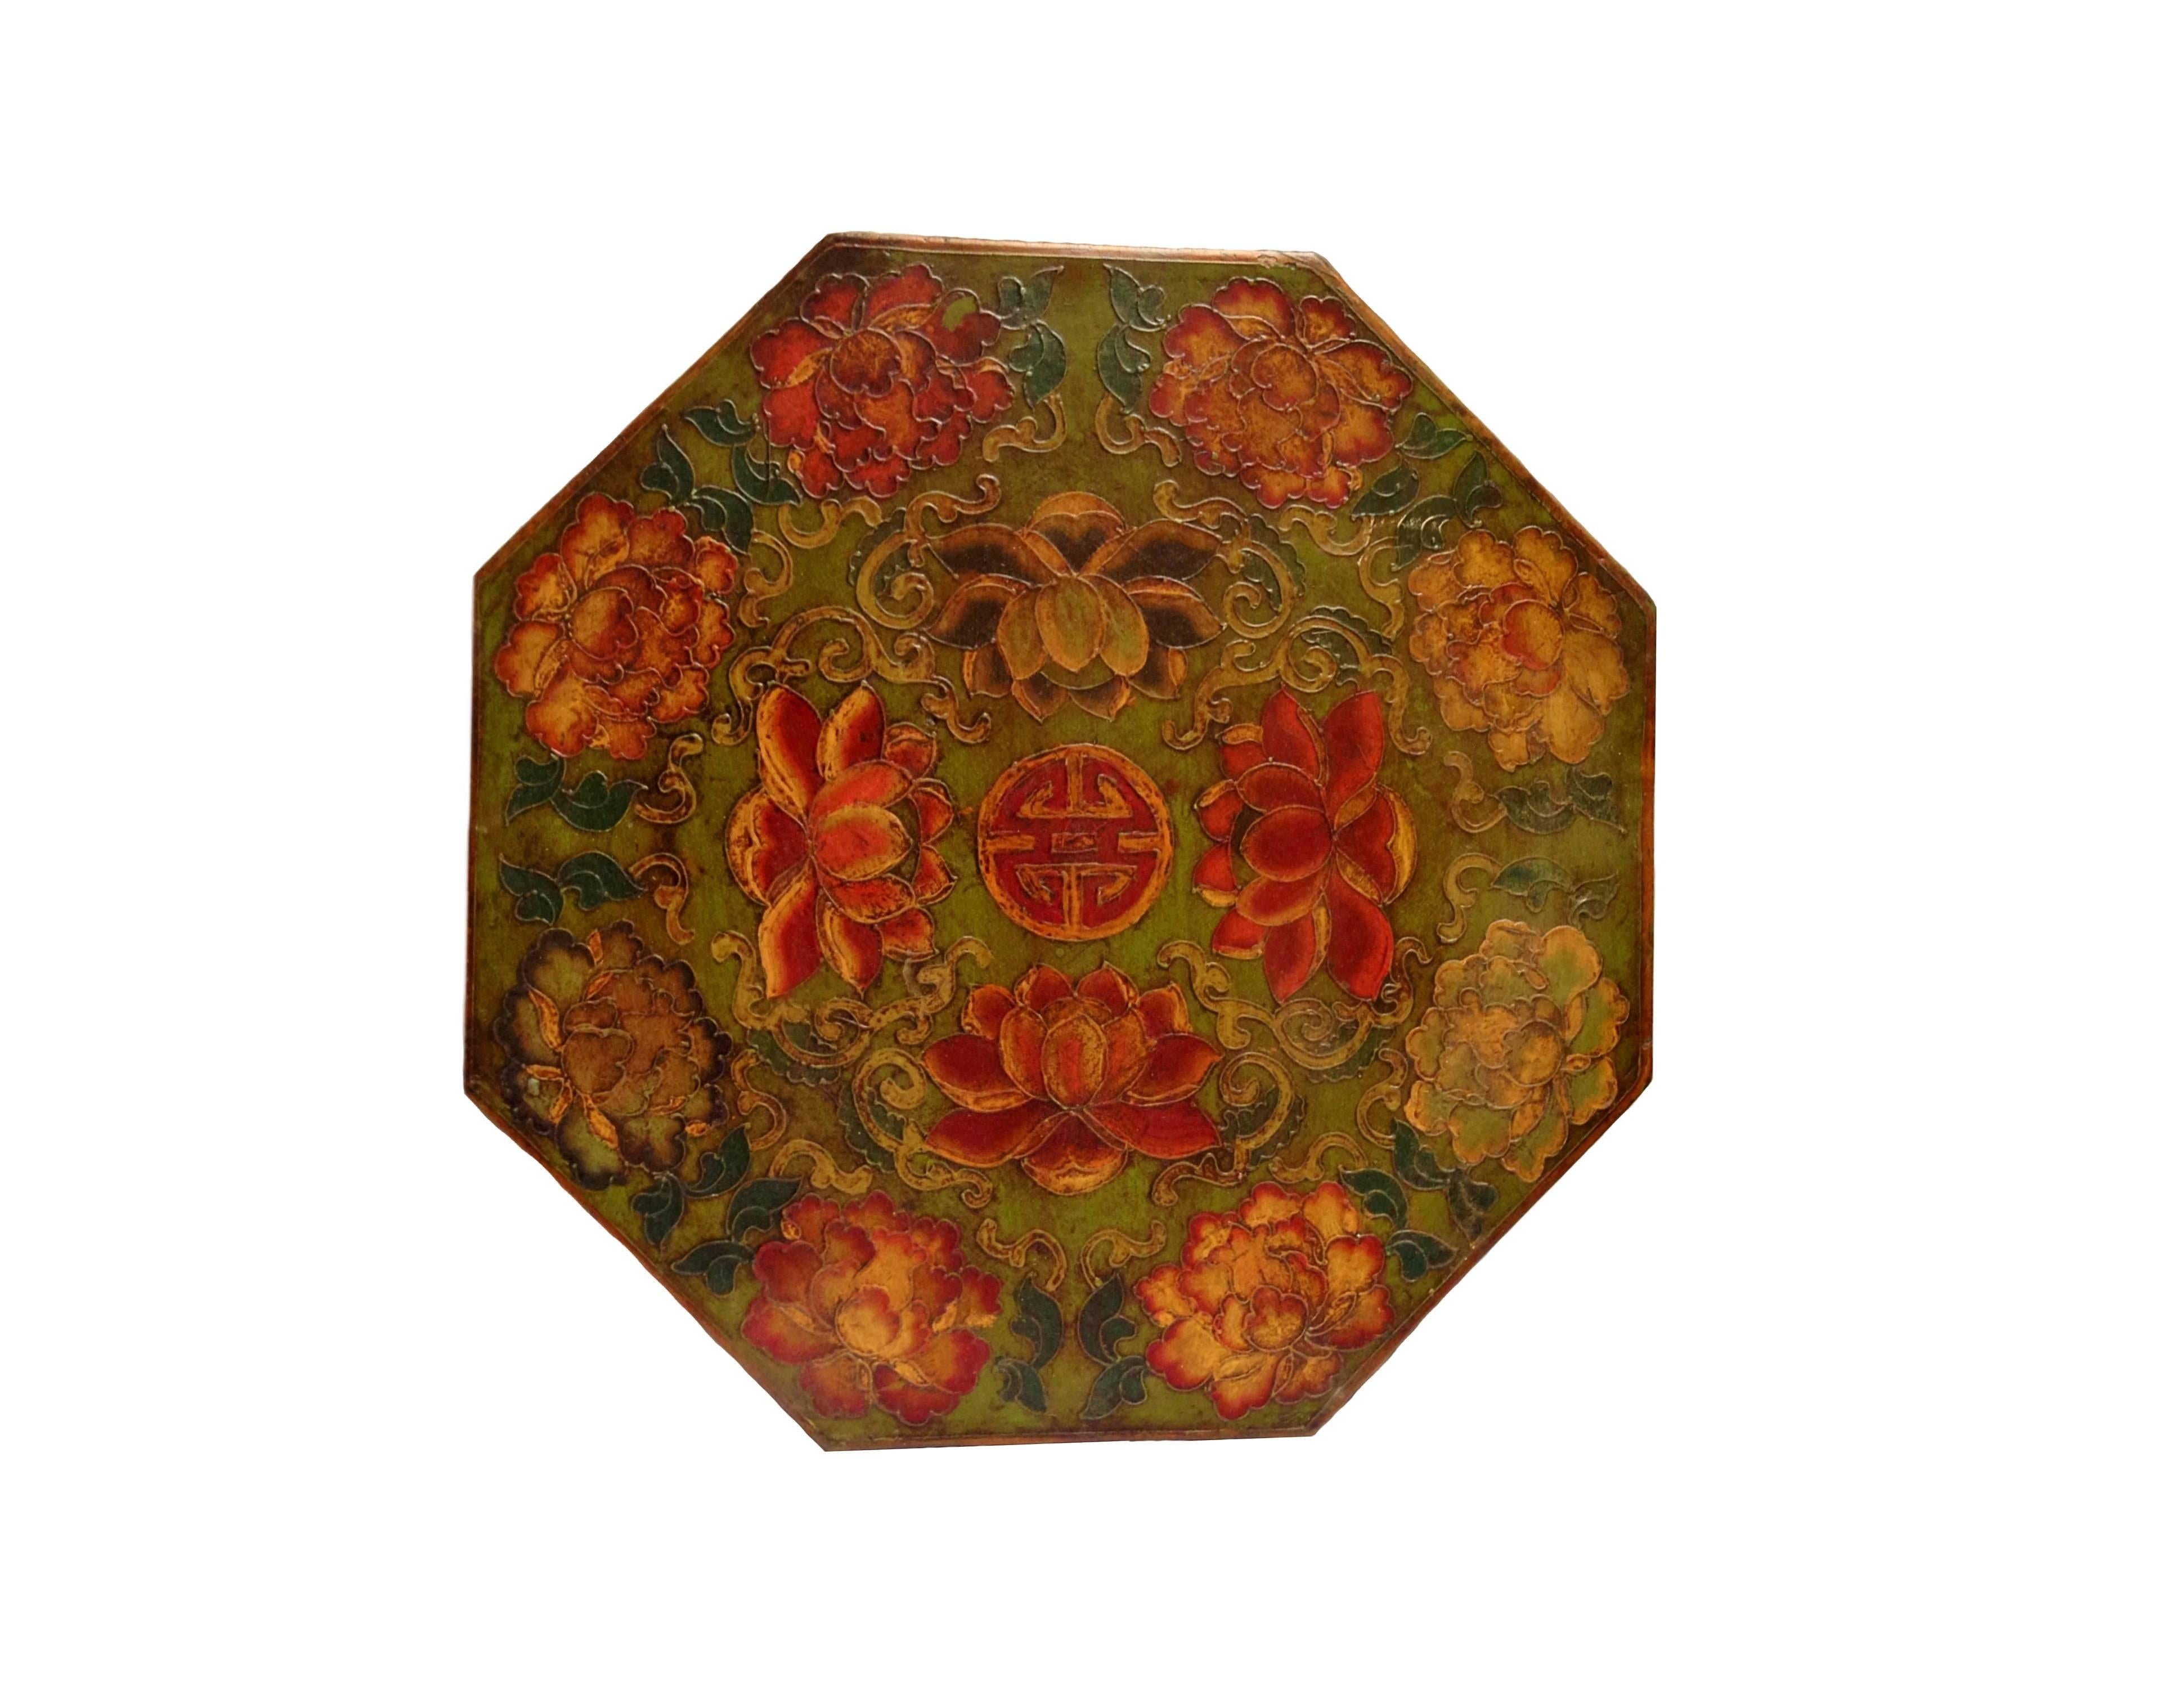 This special box is designed according to the Feng Shui theory. An octagon is believed to have the best ability to gather all positive energy. Nine being the most auspicious Feng Shui number, is how many sections the box is divided into. The cover